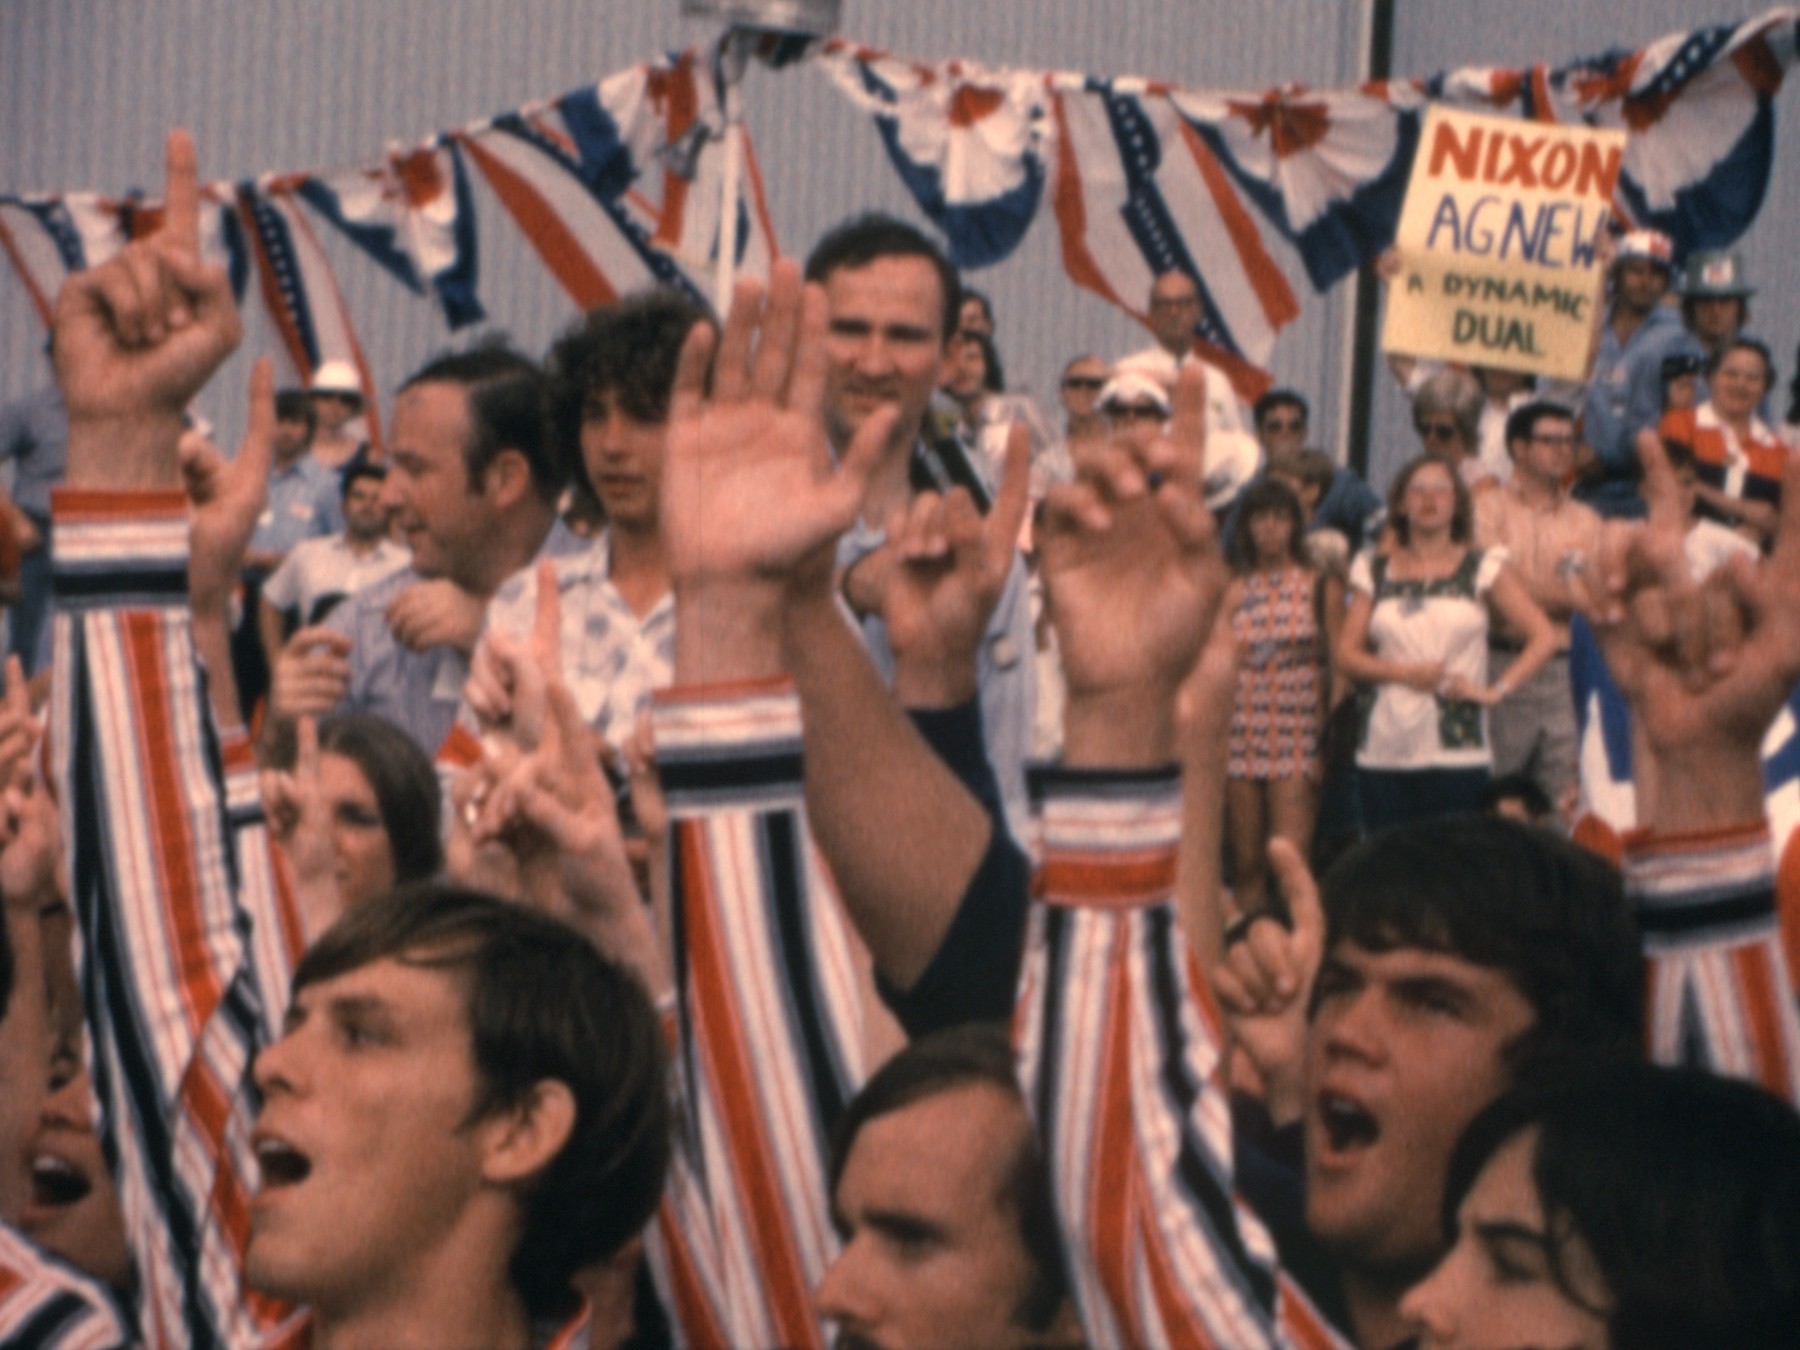 A choral group greets President Nixon on the 1972 campaign trail